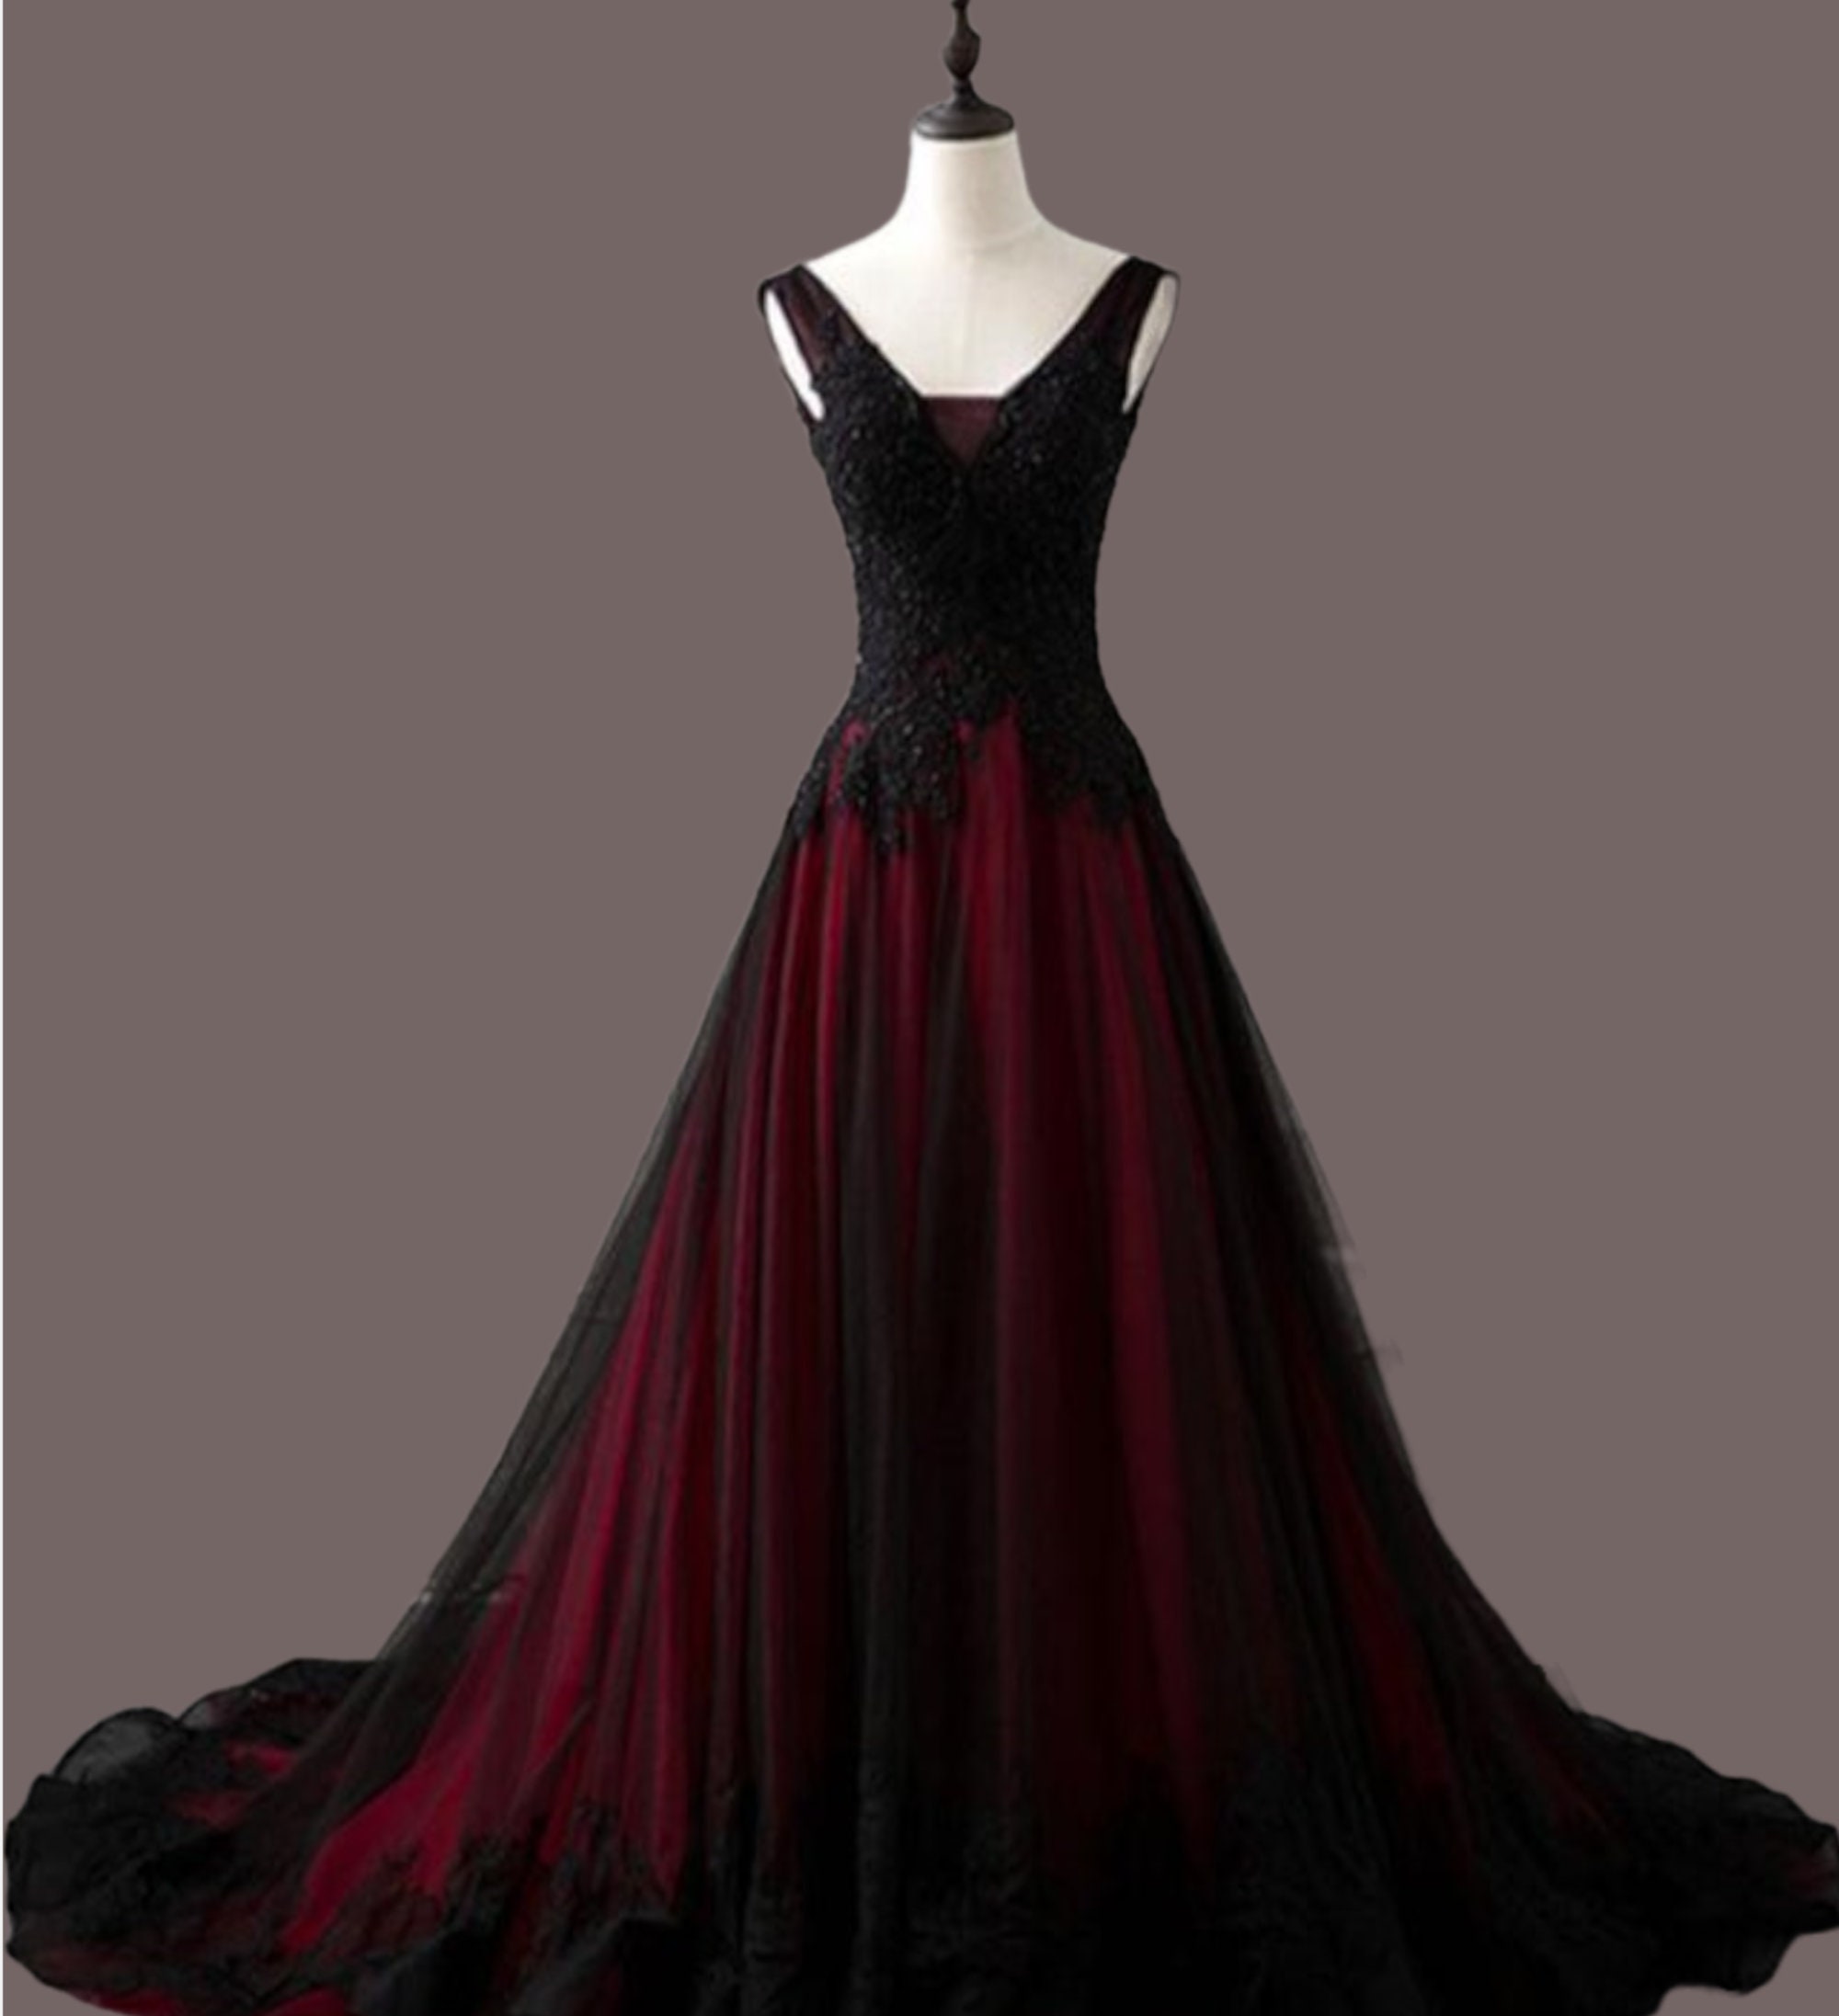 Linda Friesen - The Red Lady. The Aristocrat dress in blood red and floor  length. I created this gown last year for a client's wedding day. It's  slightly inspired by Crimson Peak ;)